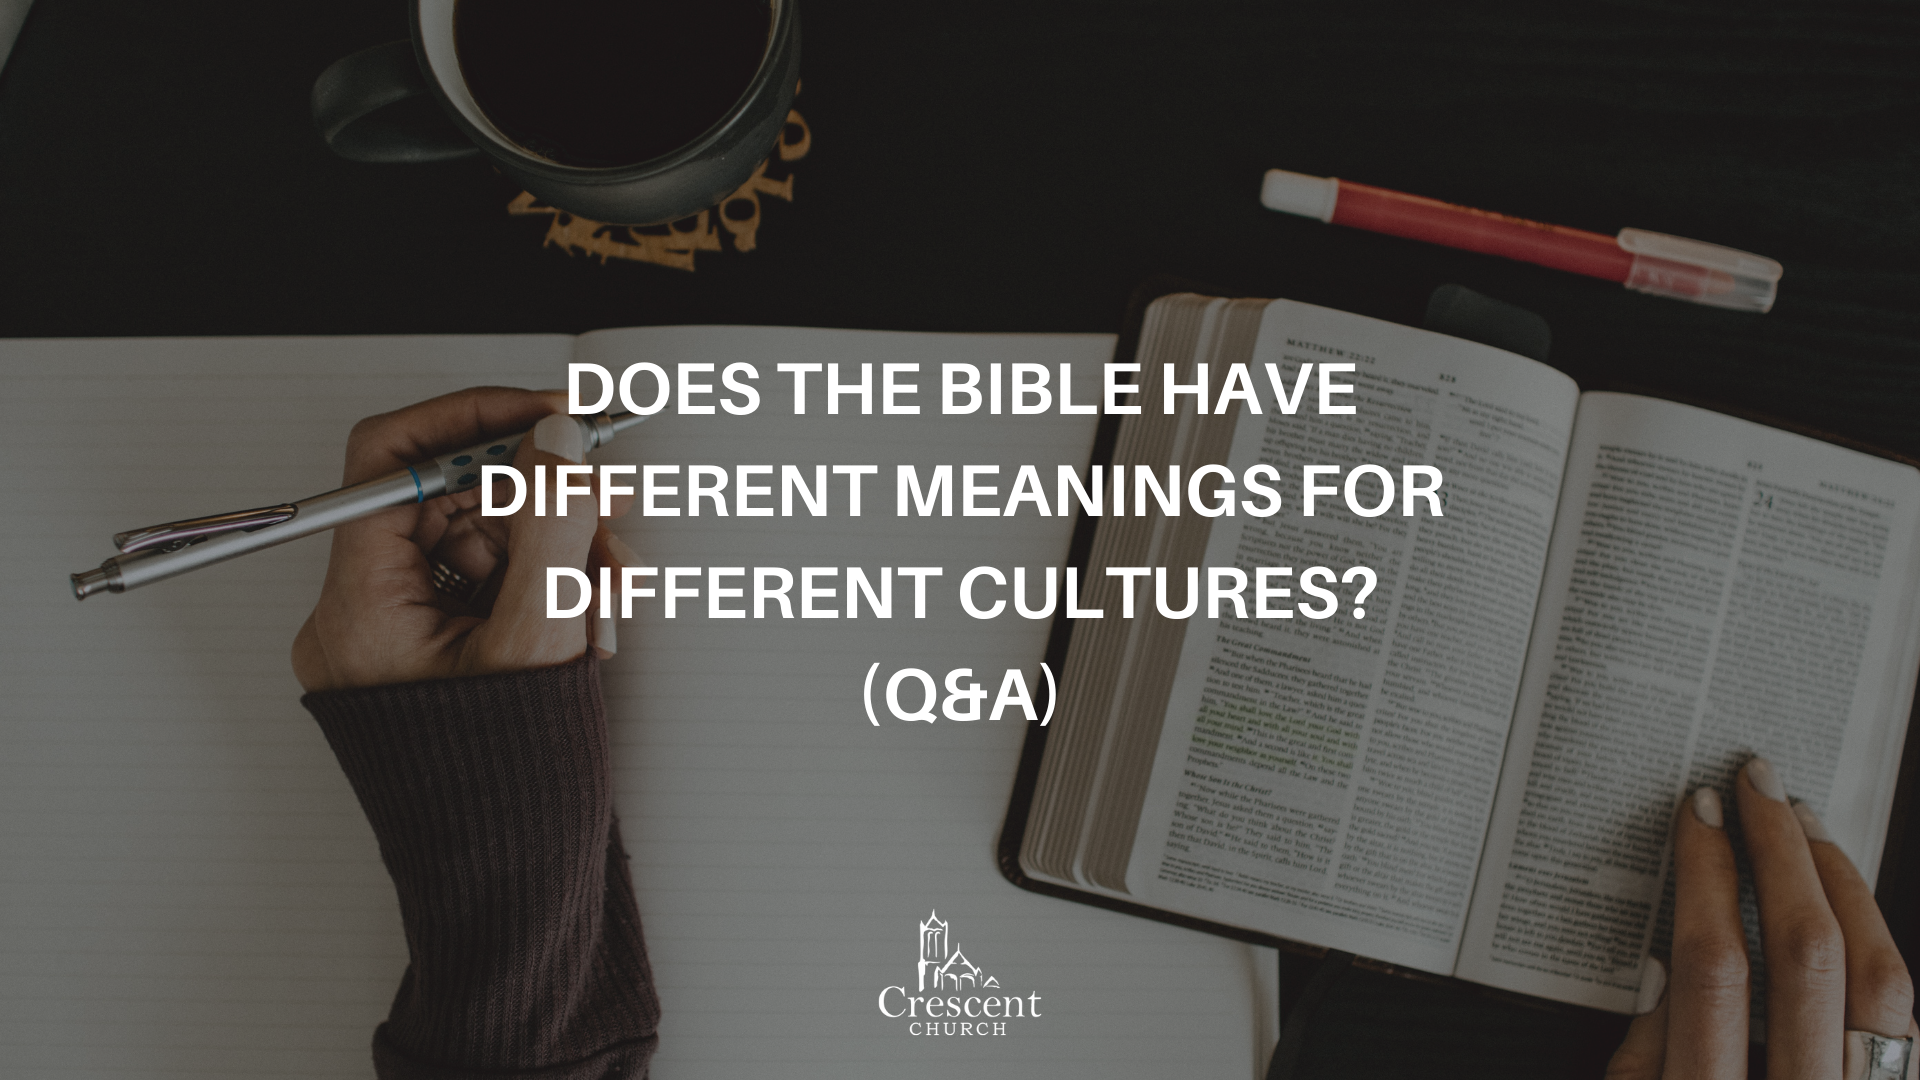 Does the Bible have different meanings for different cultures? (Q&A)